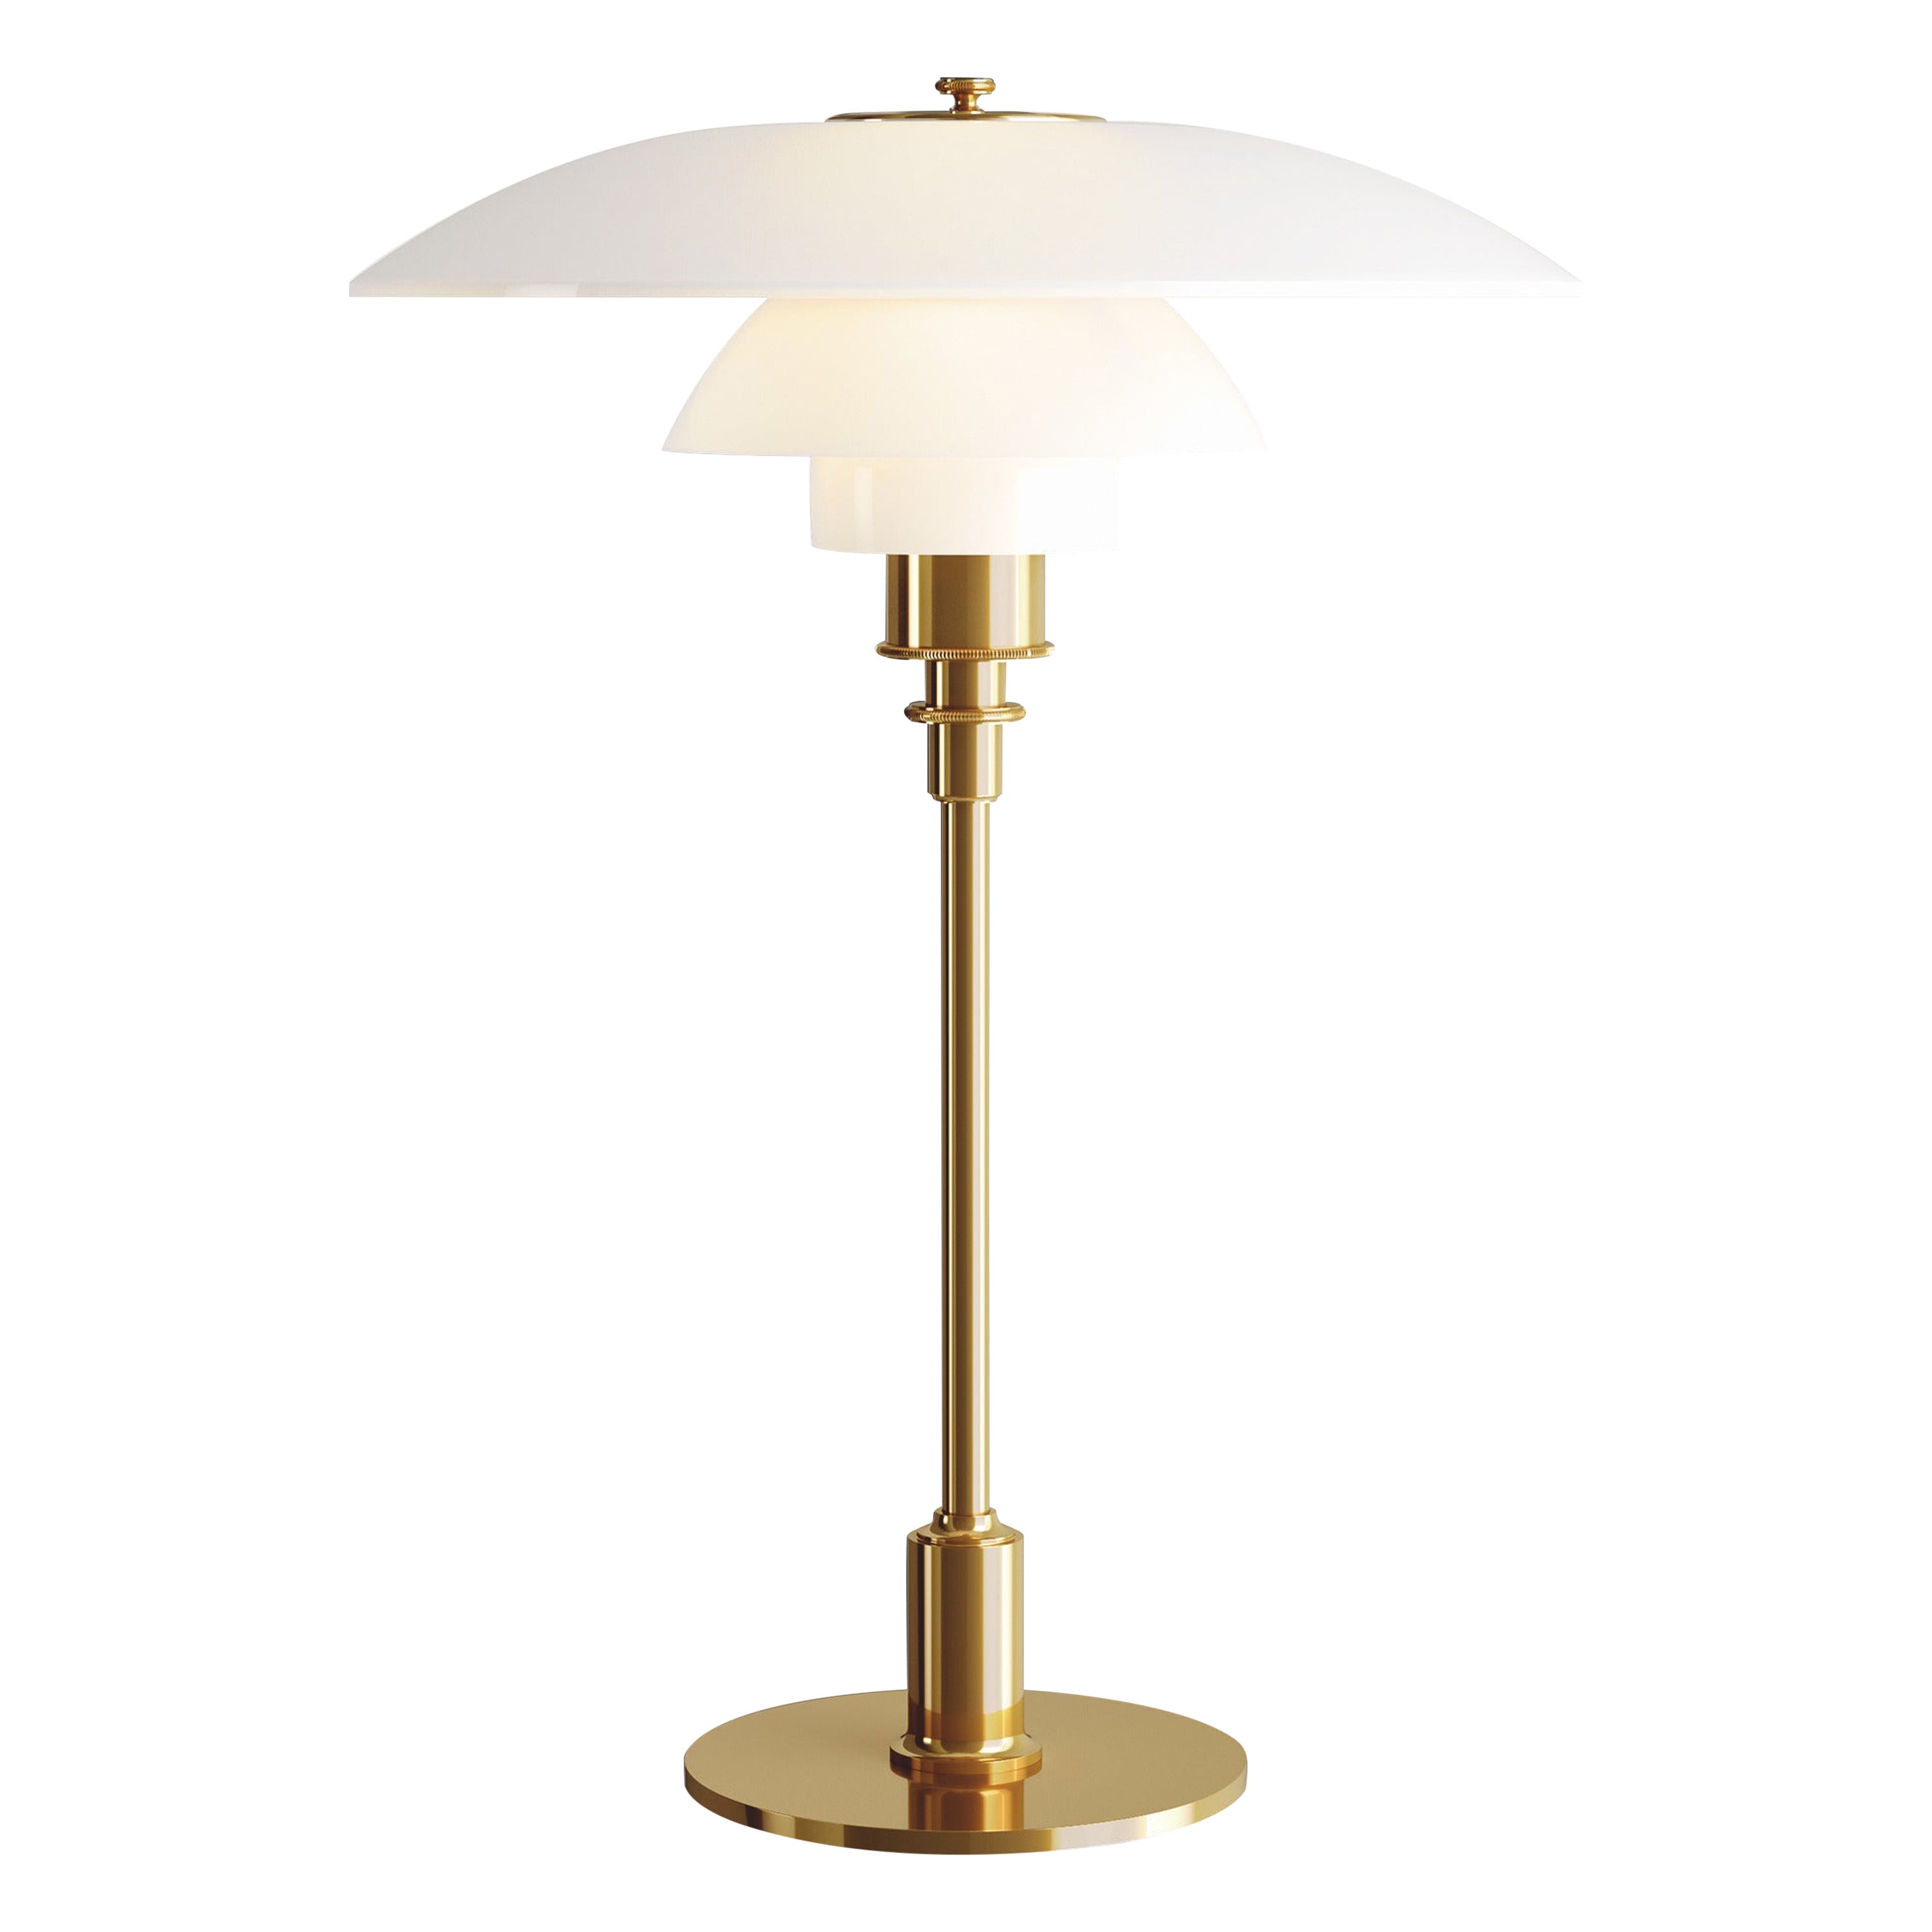 Louis Poulsen PH 3½-2½ Glass Table Lamp in Brass by Poul Henningsen For Sale